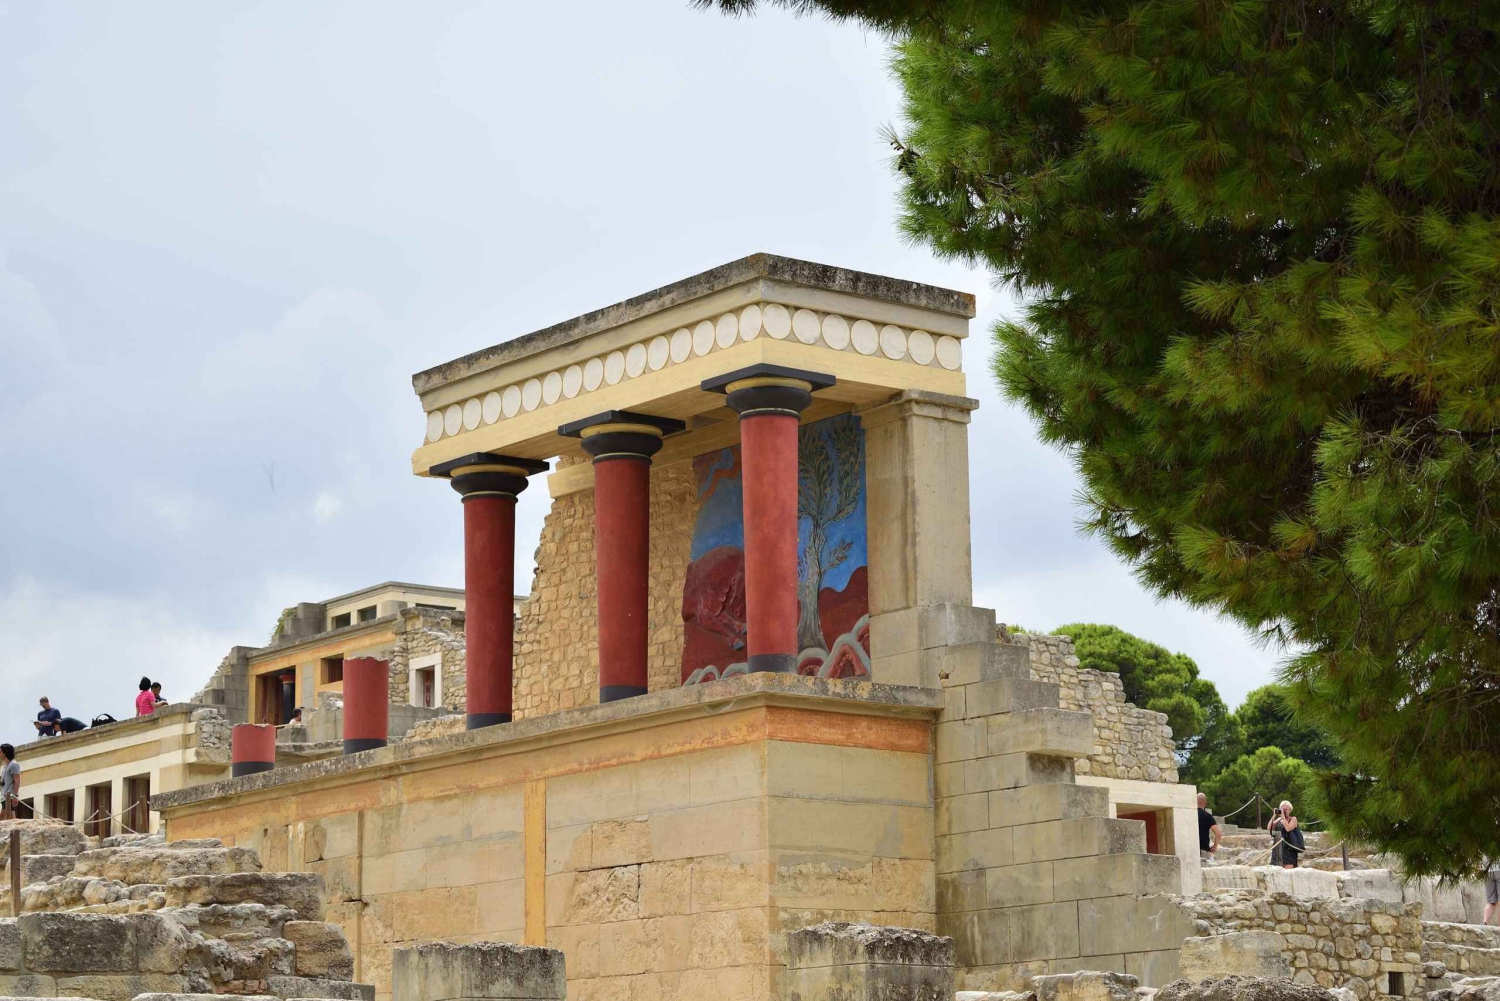 From Chania: Knossos Palace and Heraklion Full-Day Tour